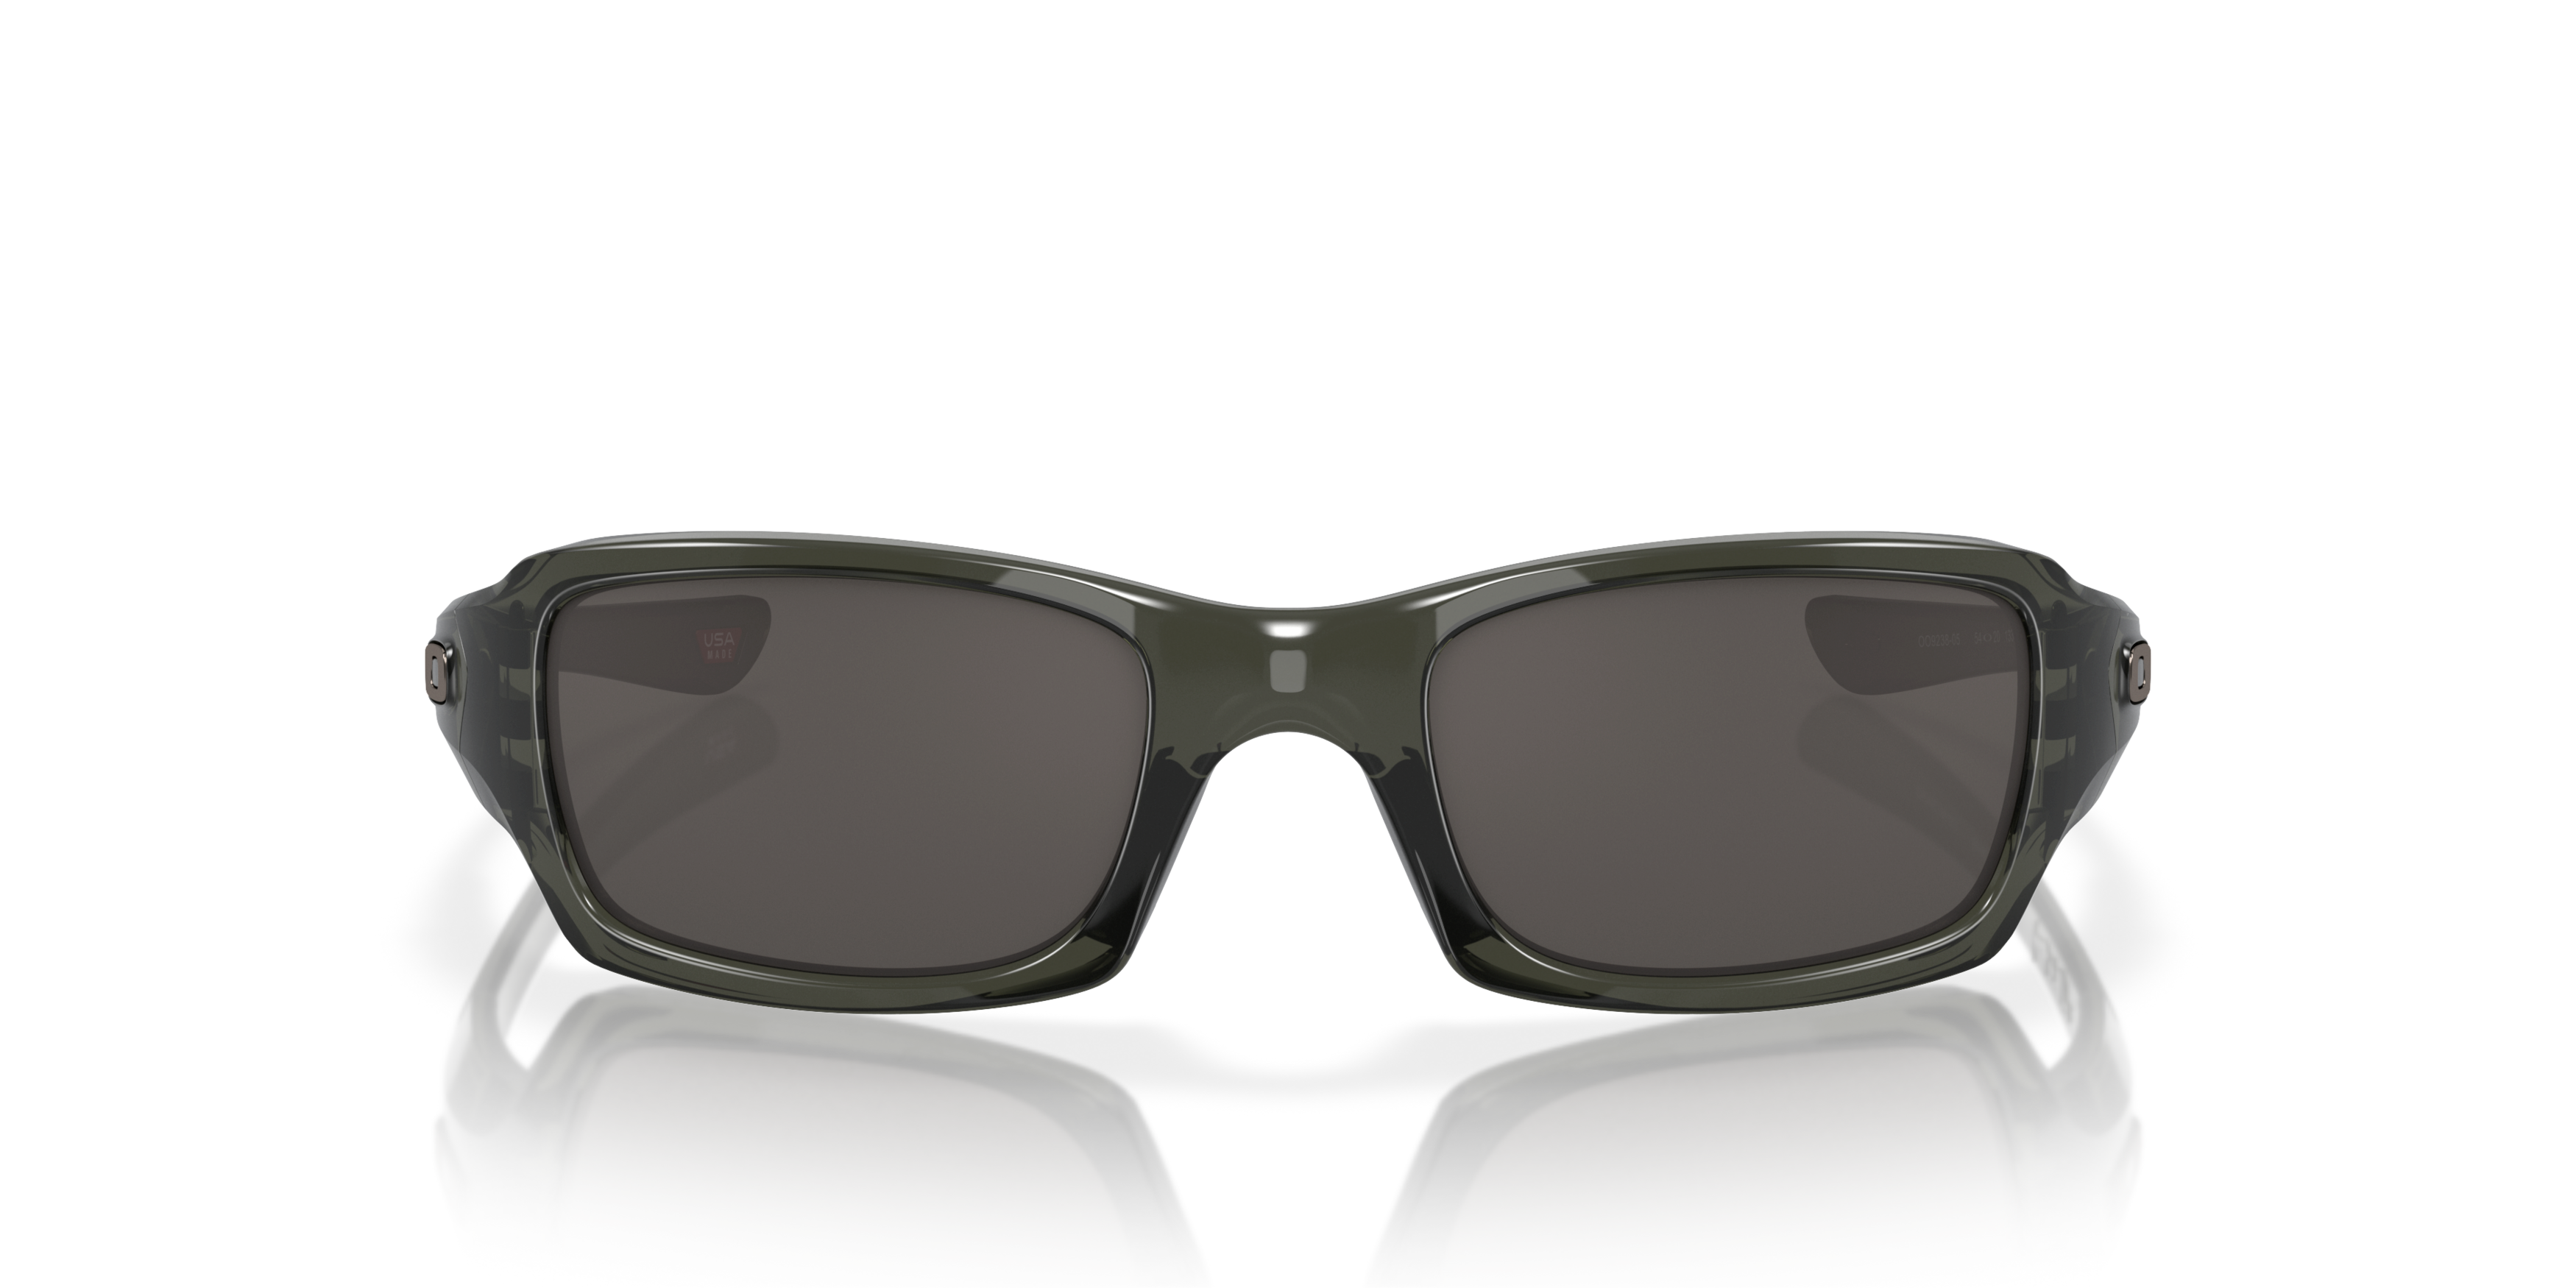 [products.image.front] Oakley Fives OO9238 923805